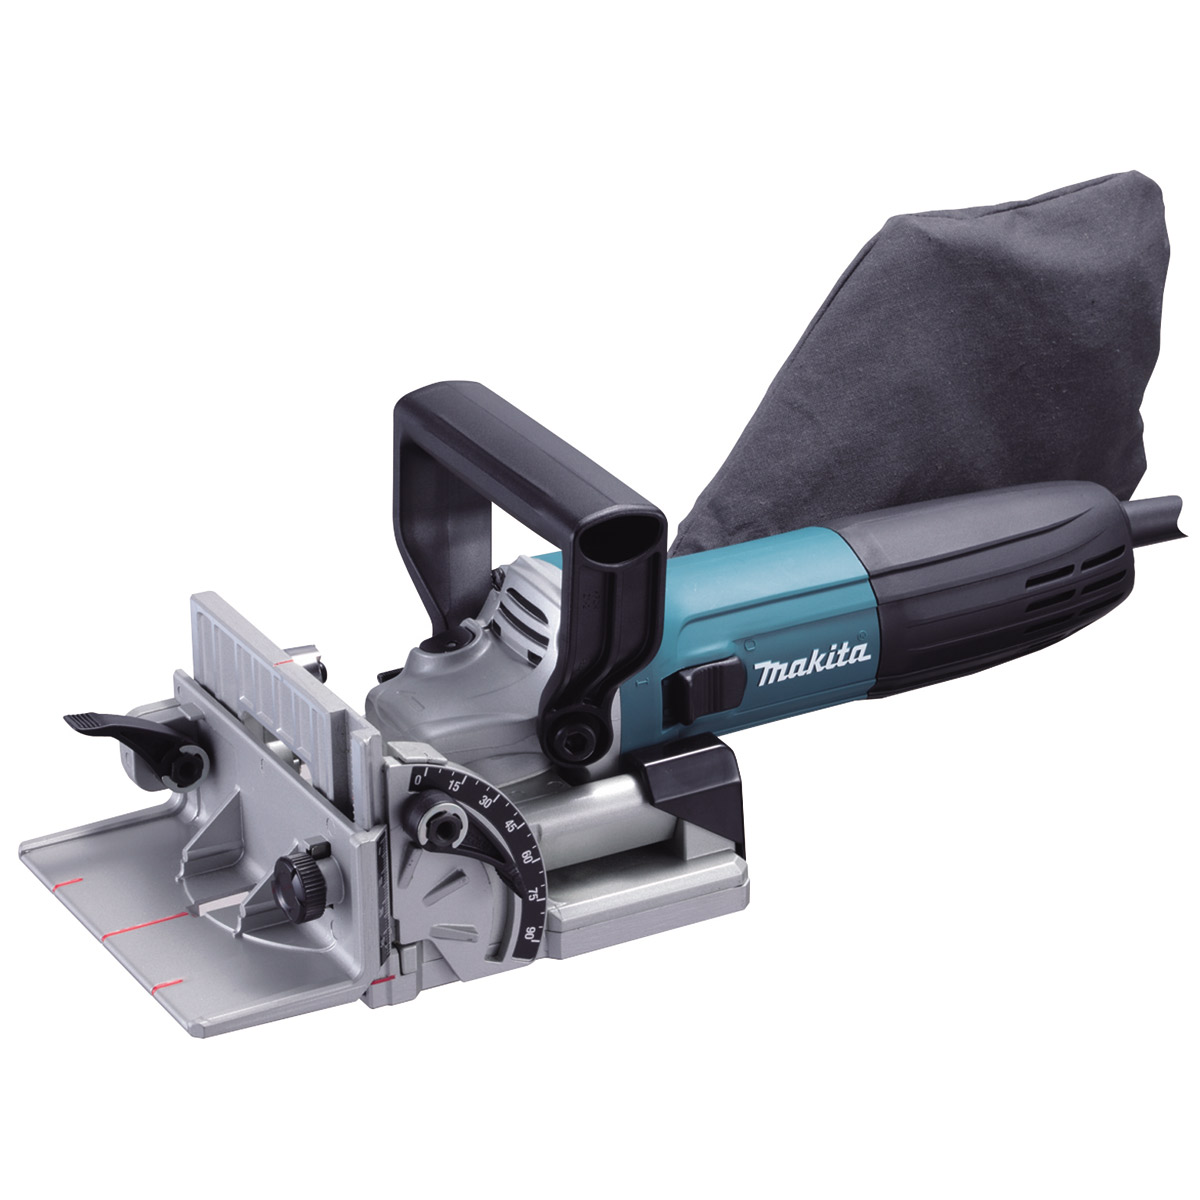 Makita Wood Plate Jointer 100mm(4") 700W 11000rpm 3kg PJ7000 - Click Image to Close